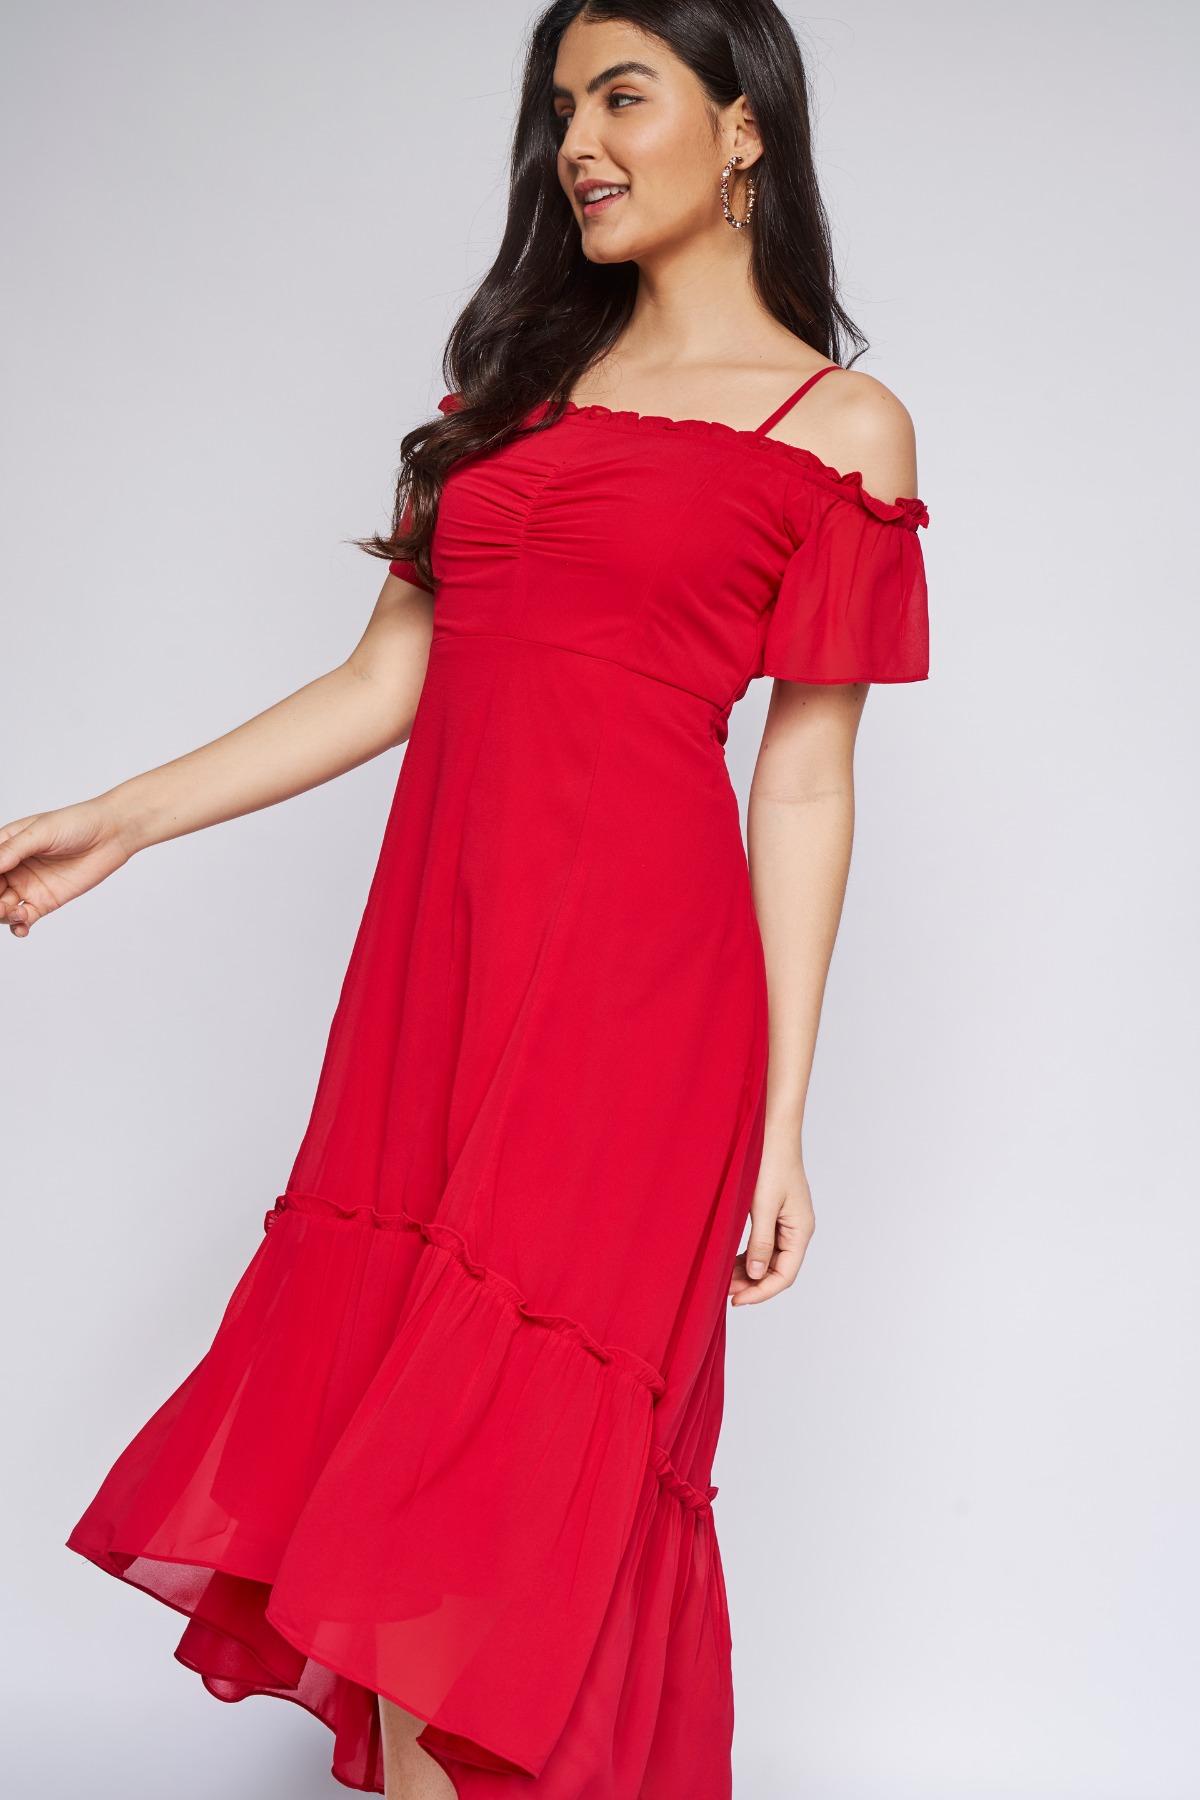 2 - Red Solid Fit & Flare Gown, image 2